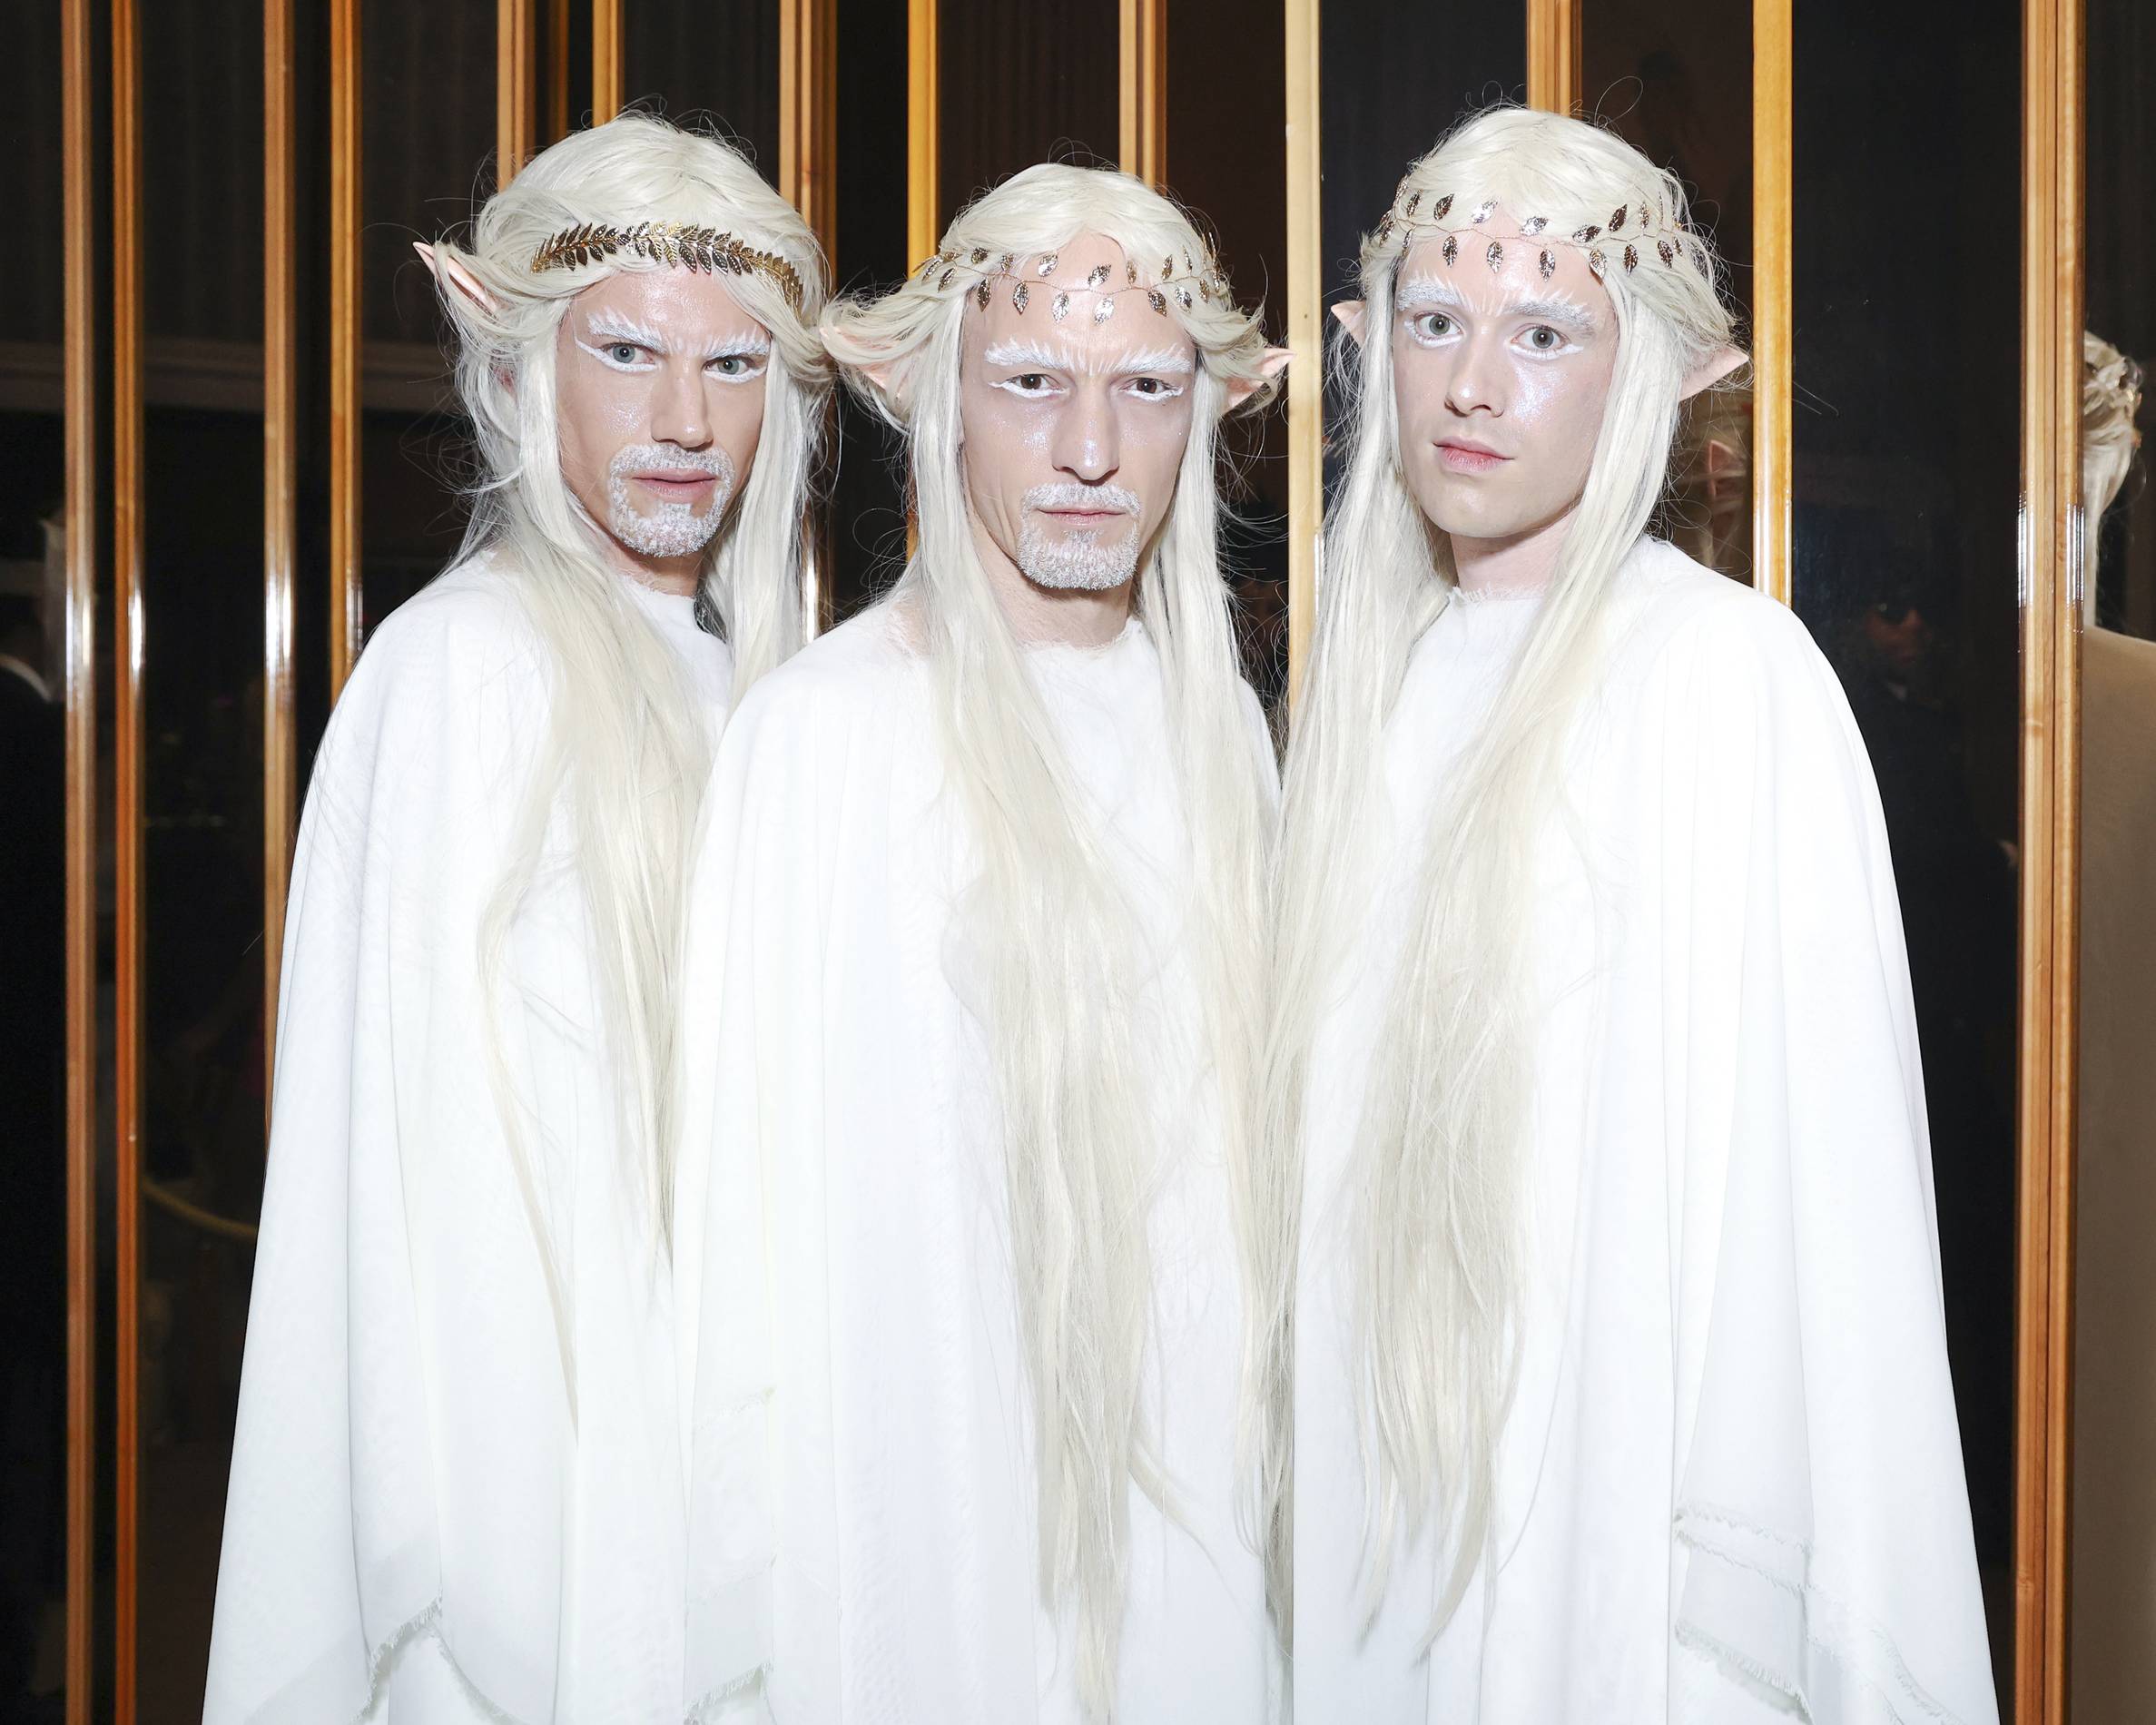 Christopher Wolf, Christian Juul Nielsen and Casper Warner in costume at the standard halloween party 2022